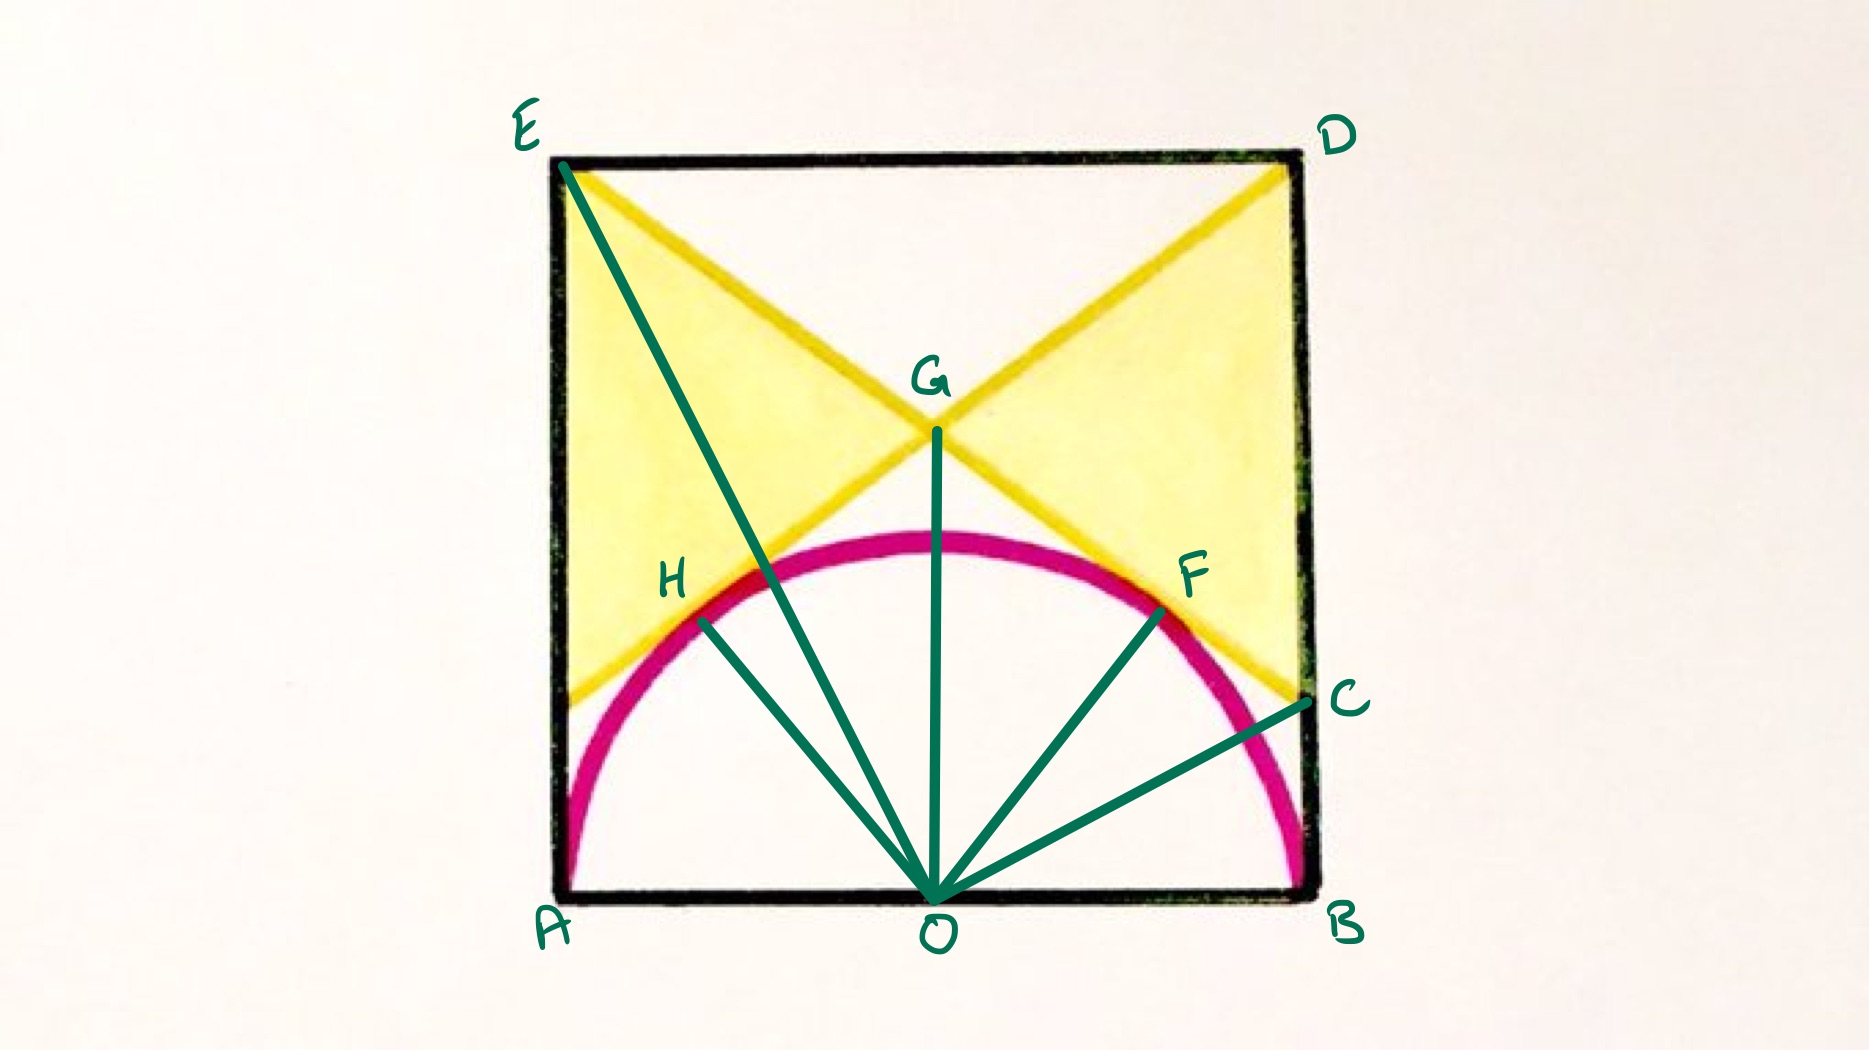 Semi-circle and tangents in a square labelled